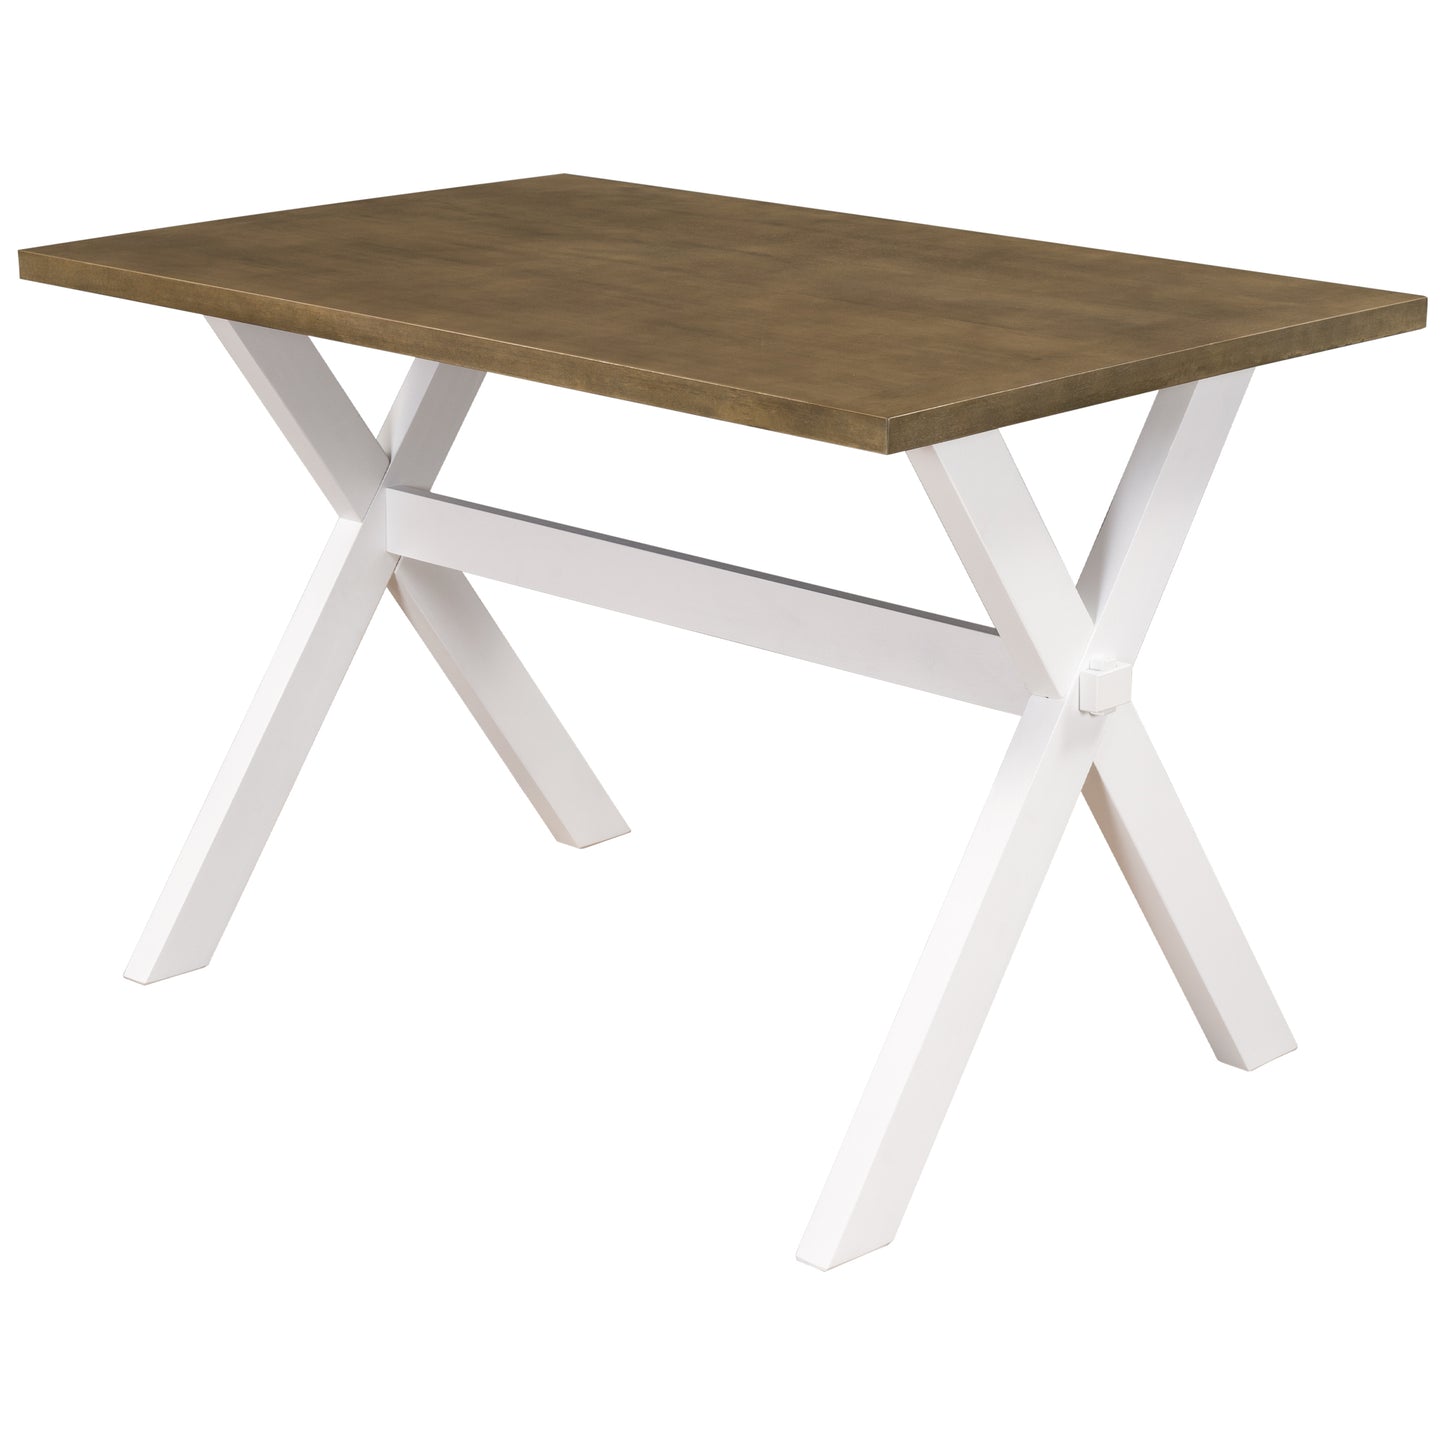 Farmhouse Rustic Wood  Dining Table with X-shape Legs, Brown+White